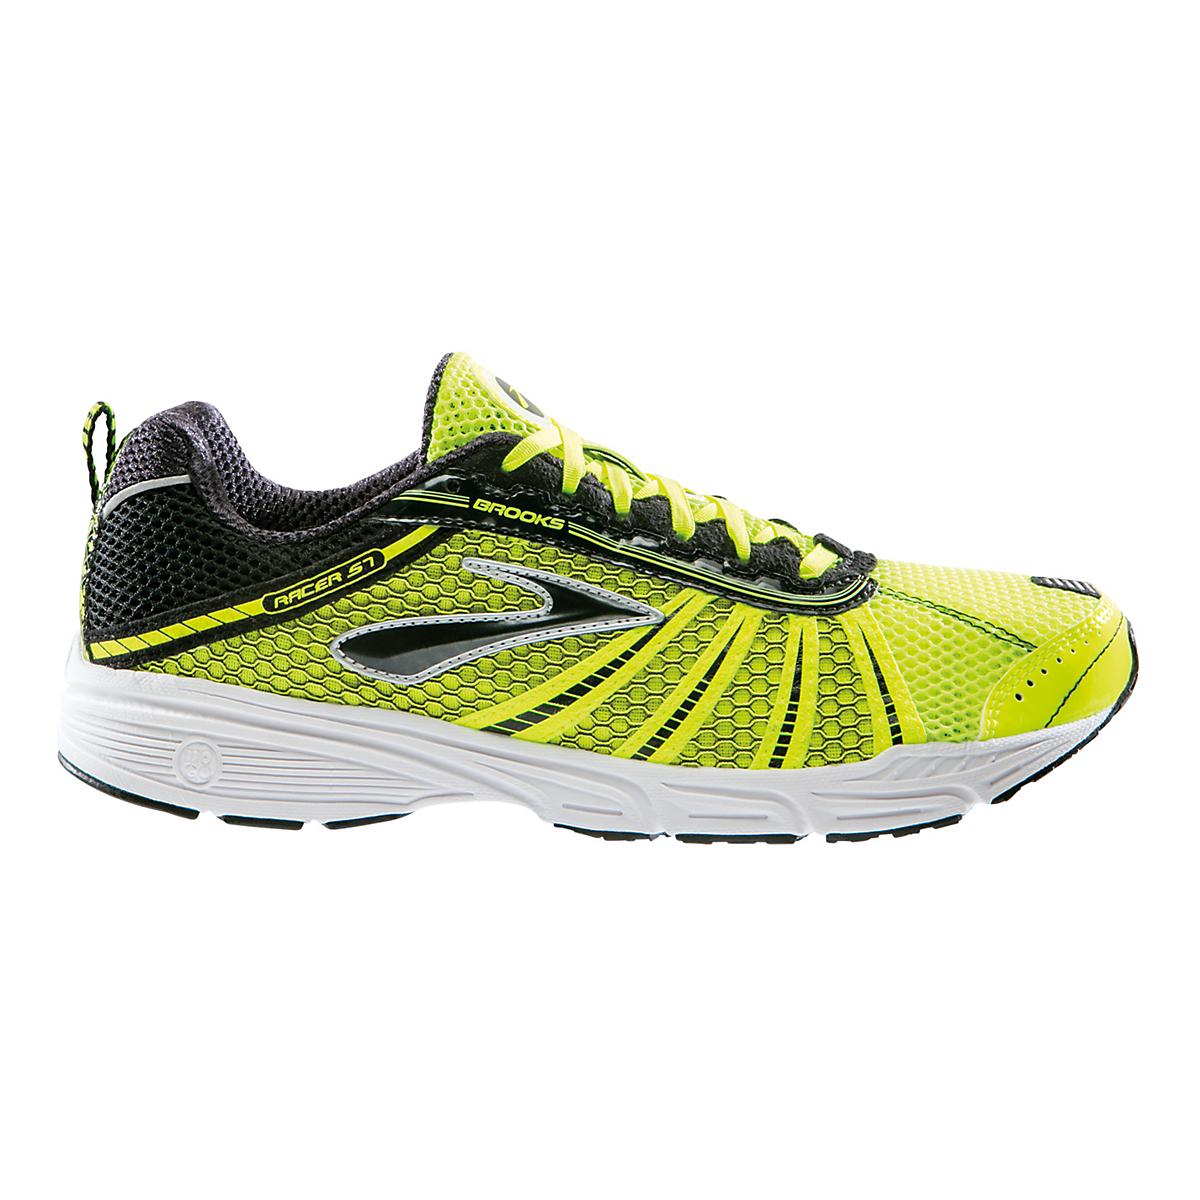 Brooks Racer ST 5 Racing Shoe at Road Runner Sports